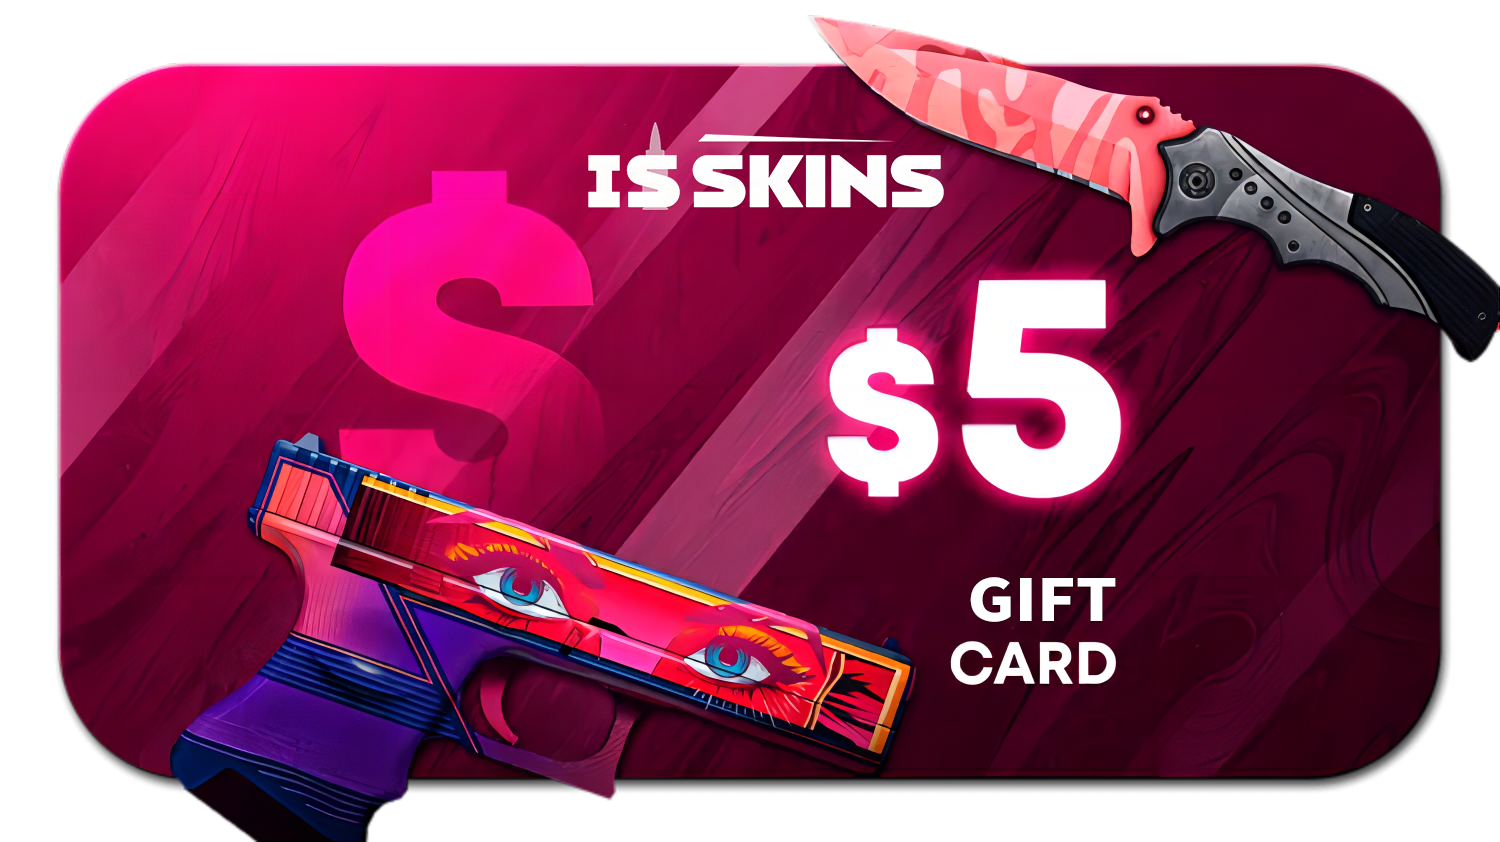 ISSKINS $5 Gift Card, $5.29